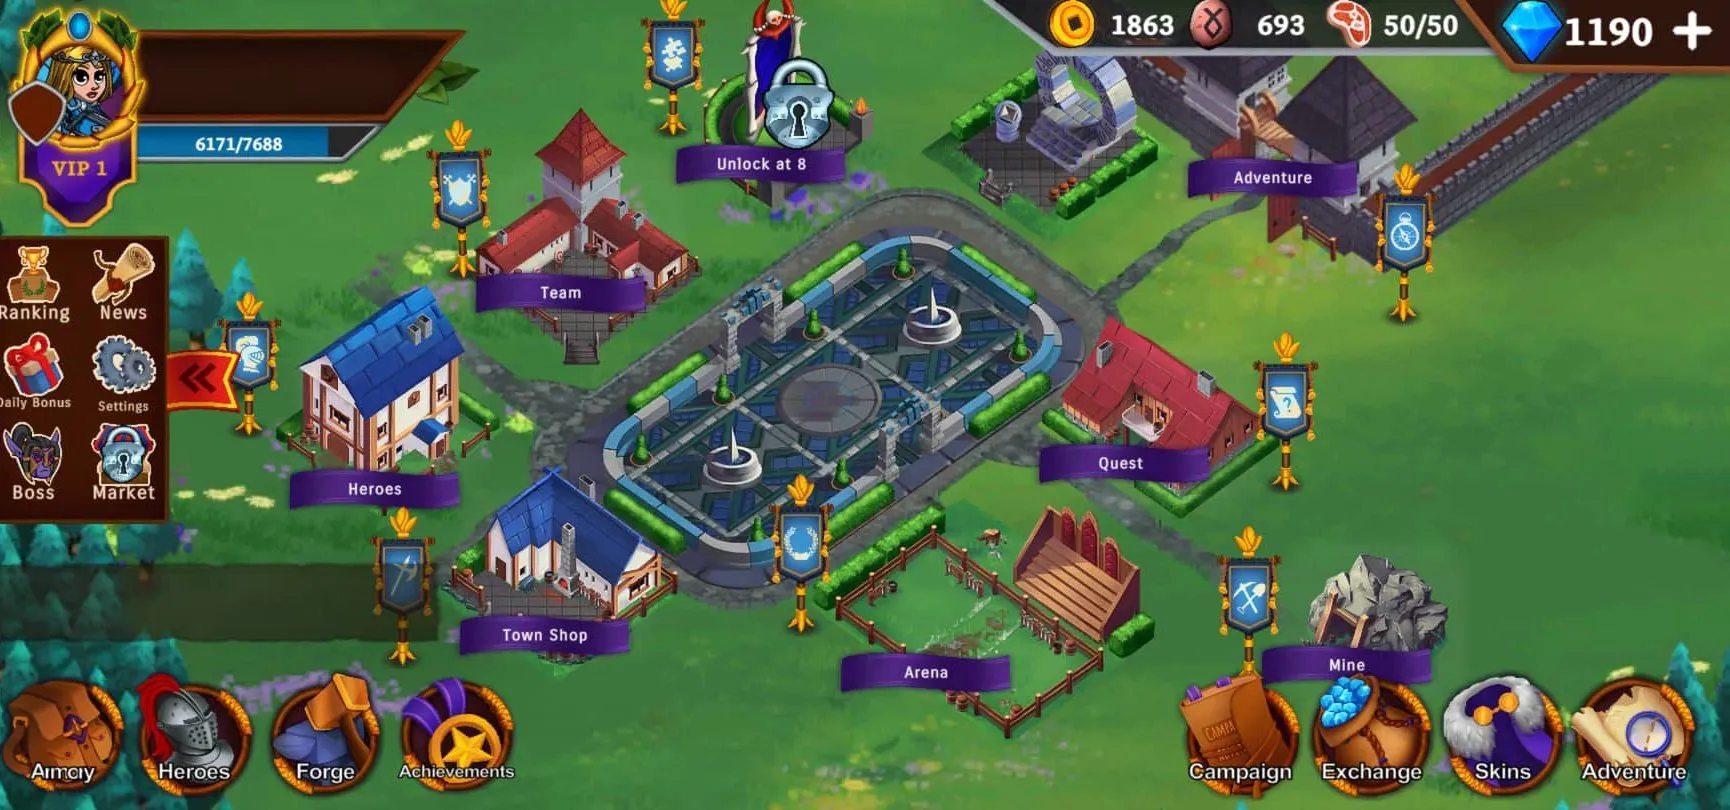 The homescreen of Forest Knight showcases a variety of buildings with distinct functions, along with other buttons that players can explore.